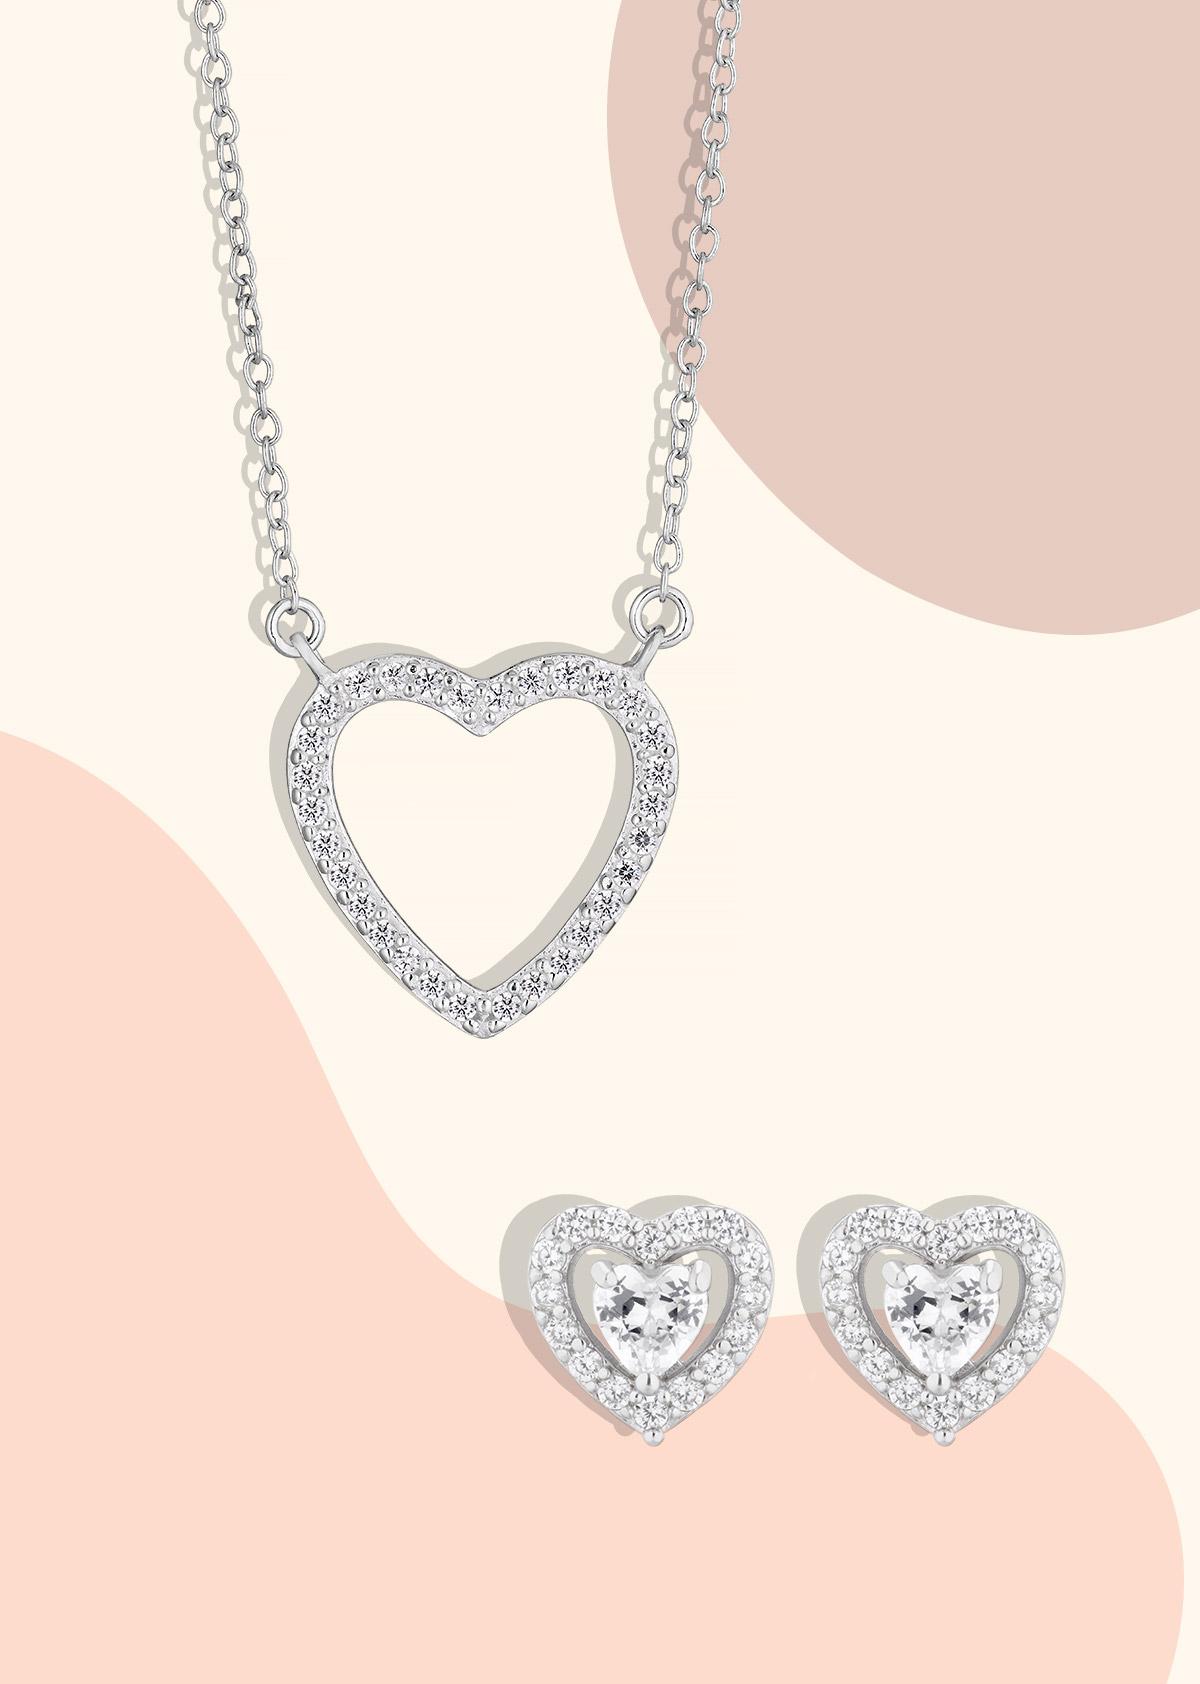 cubic zirconia necklace and earrings